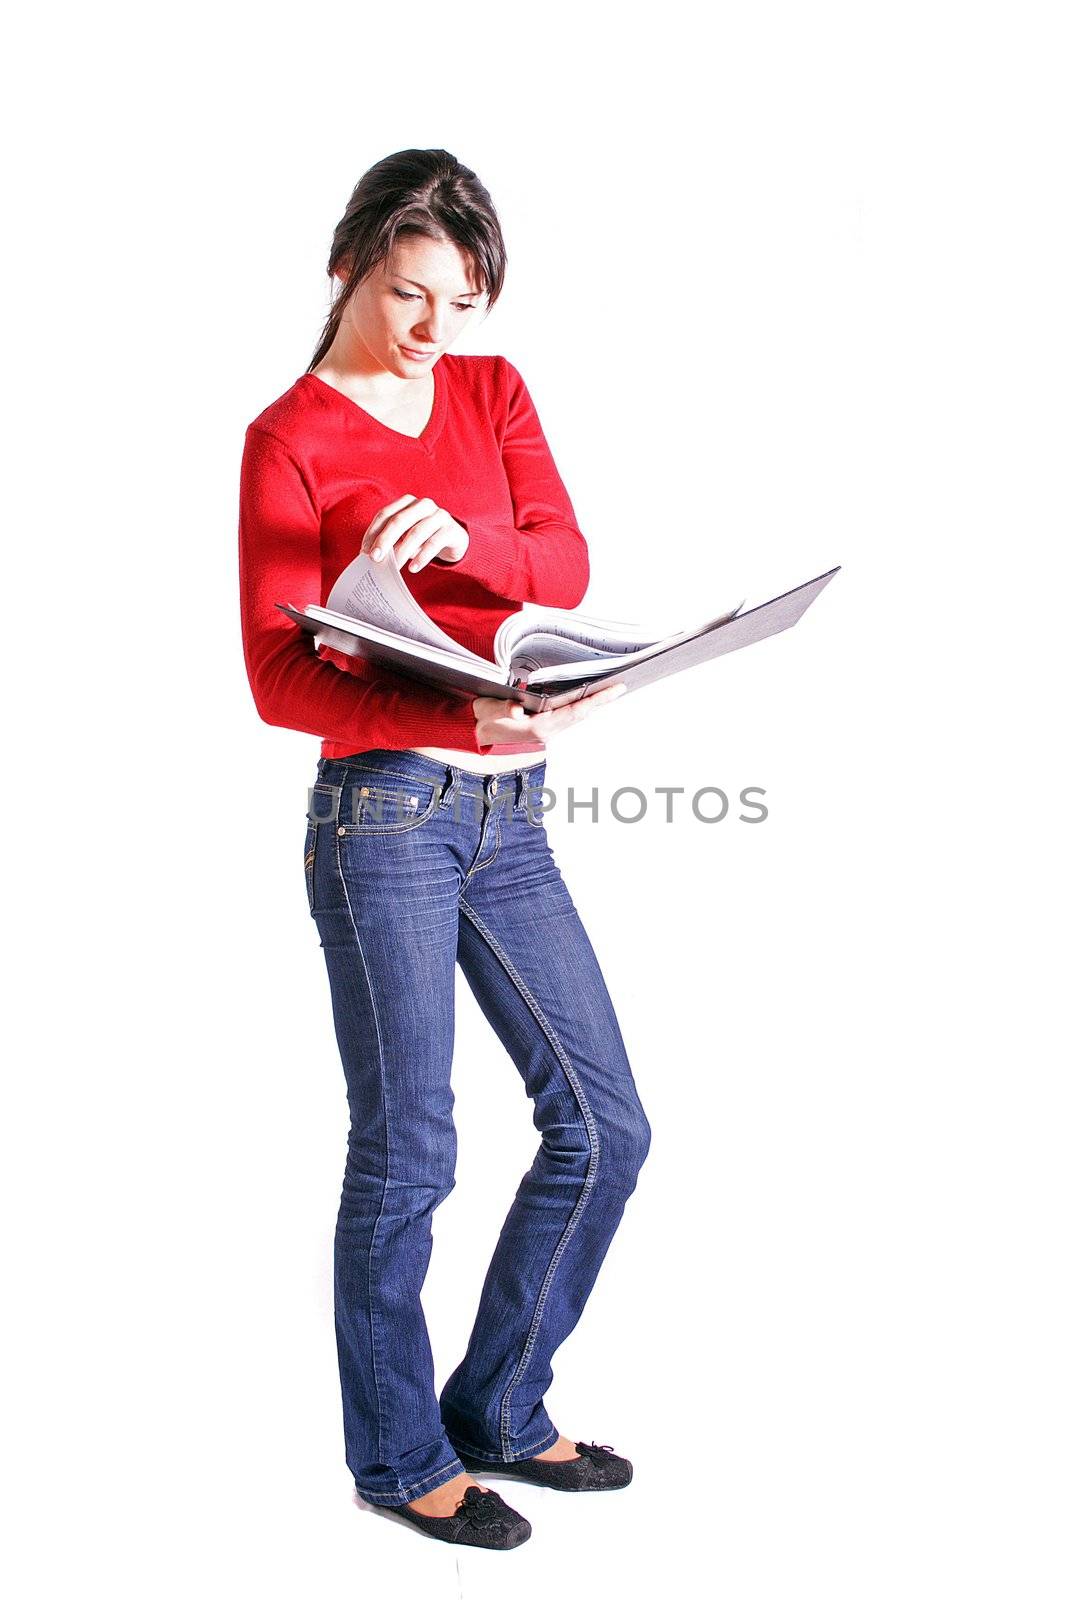 Full length shof of an attractive student. All on white background.